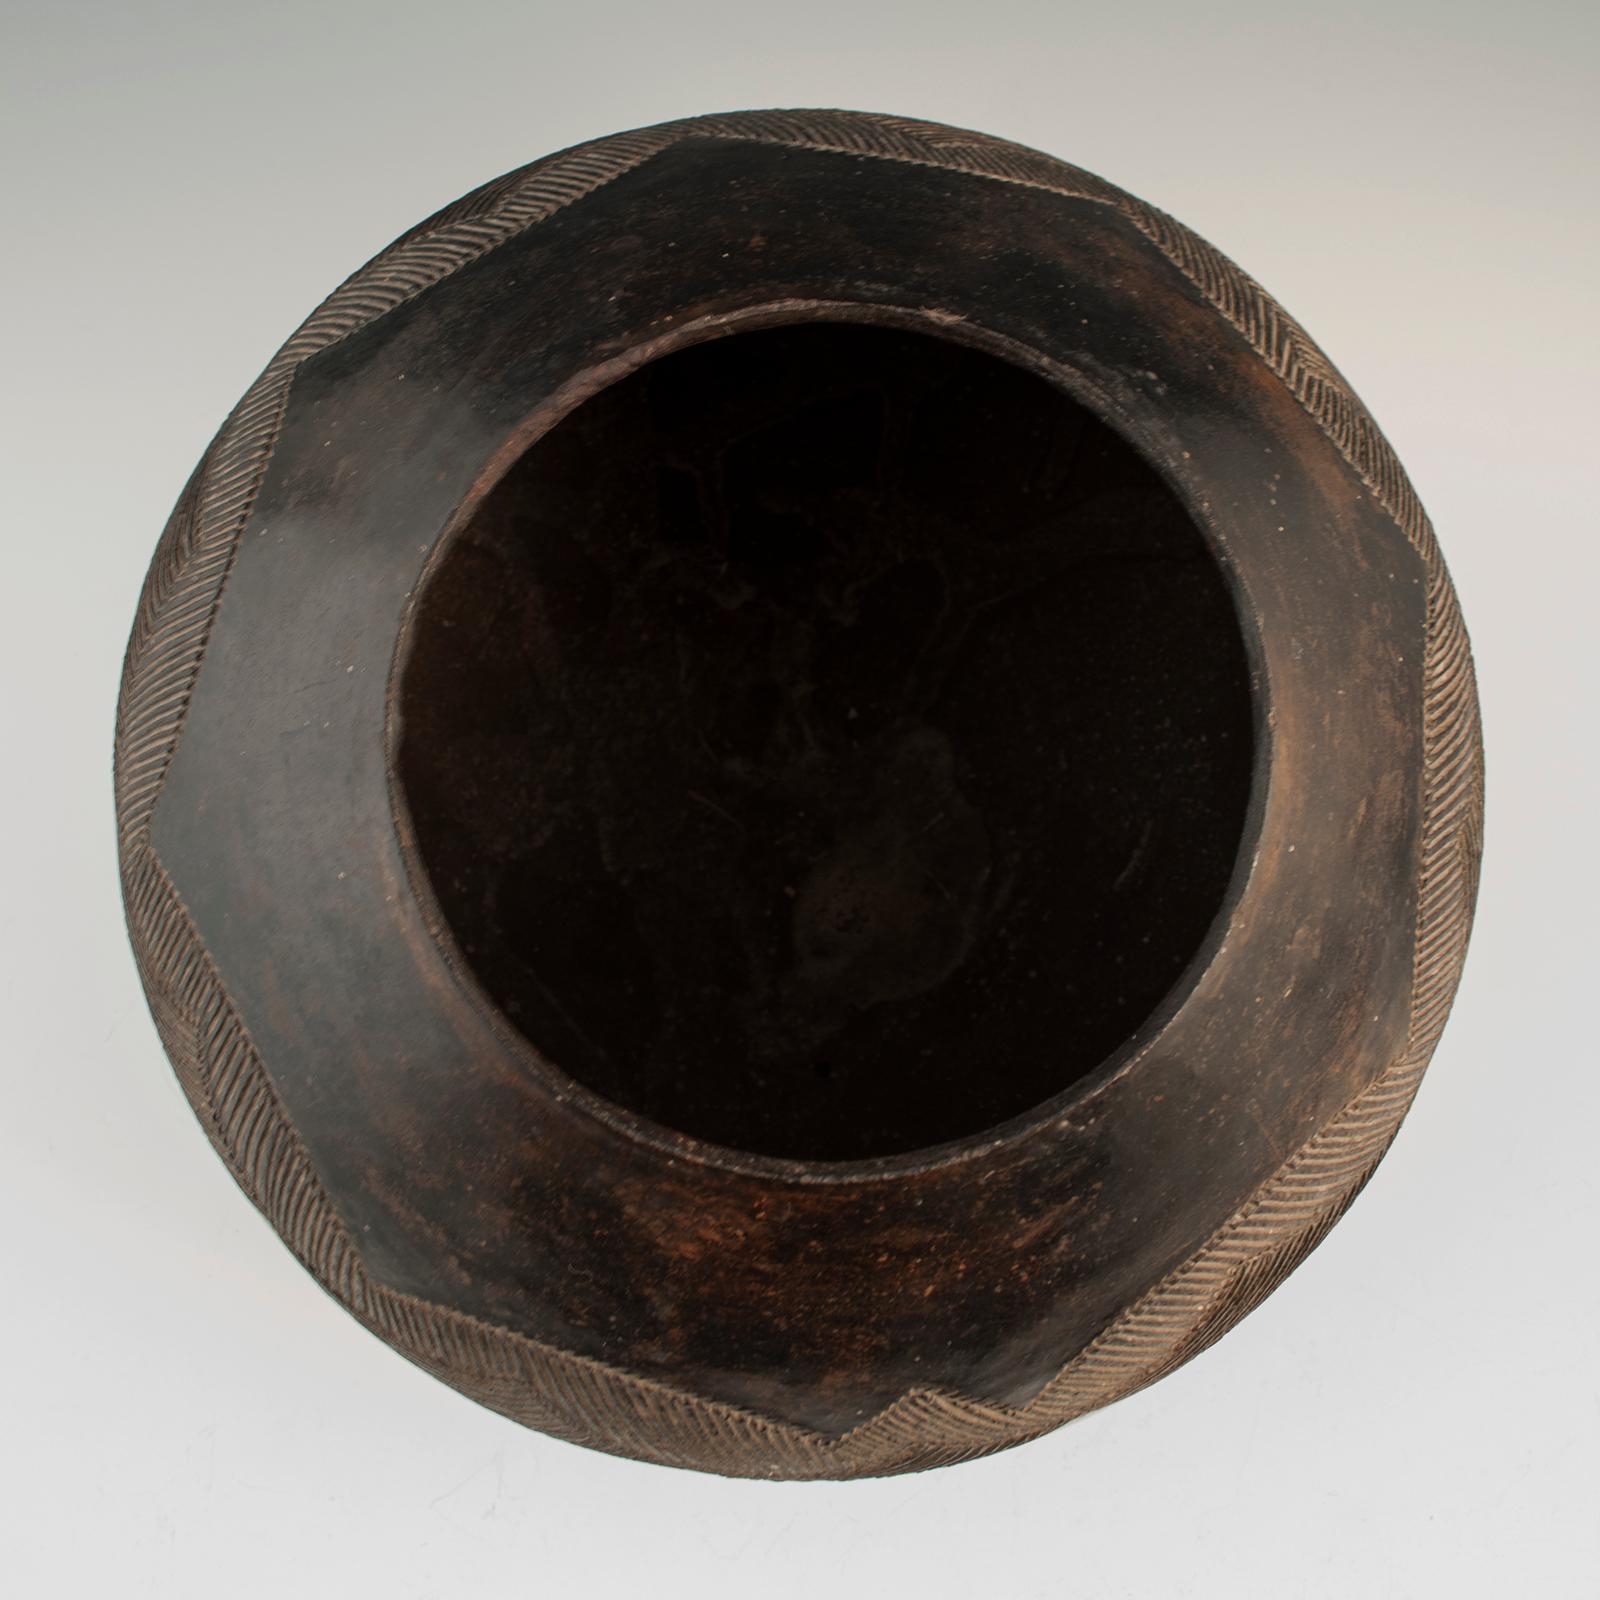 Mid-20th century tribal ceramic beer pot, Zulu People, South Africa.

Gracefully incised lines decorate this pot (umancishane), which was used for drinking sorghum beer. The condition is excellent with no cracks or chips. Measures: 9